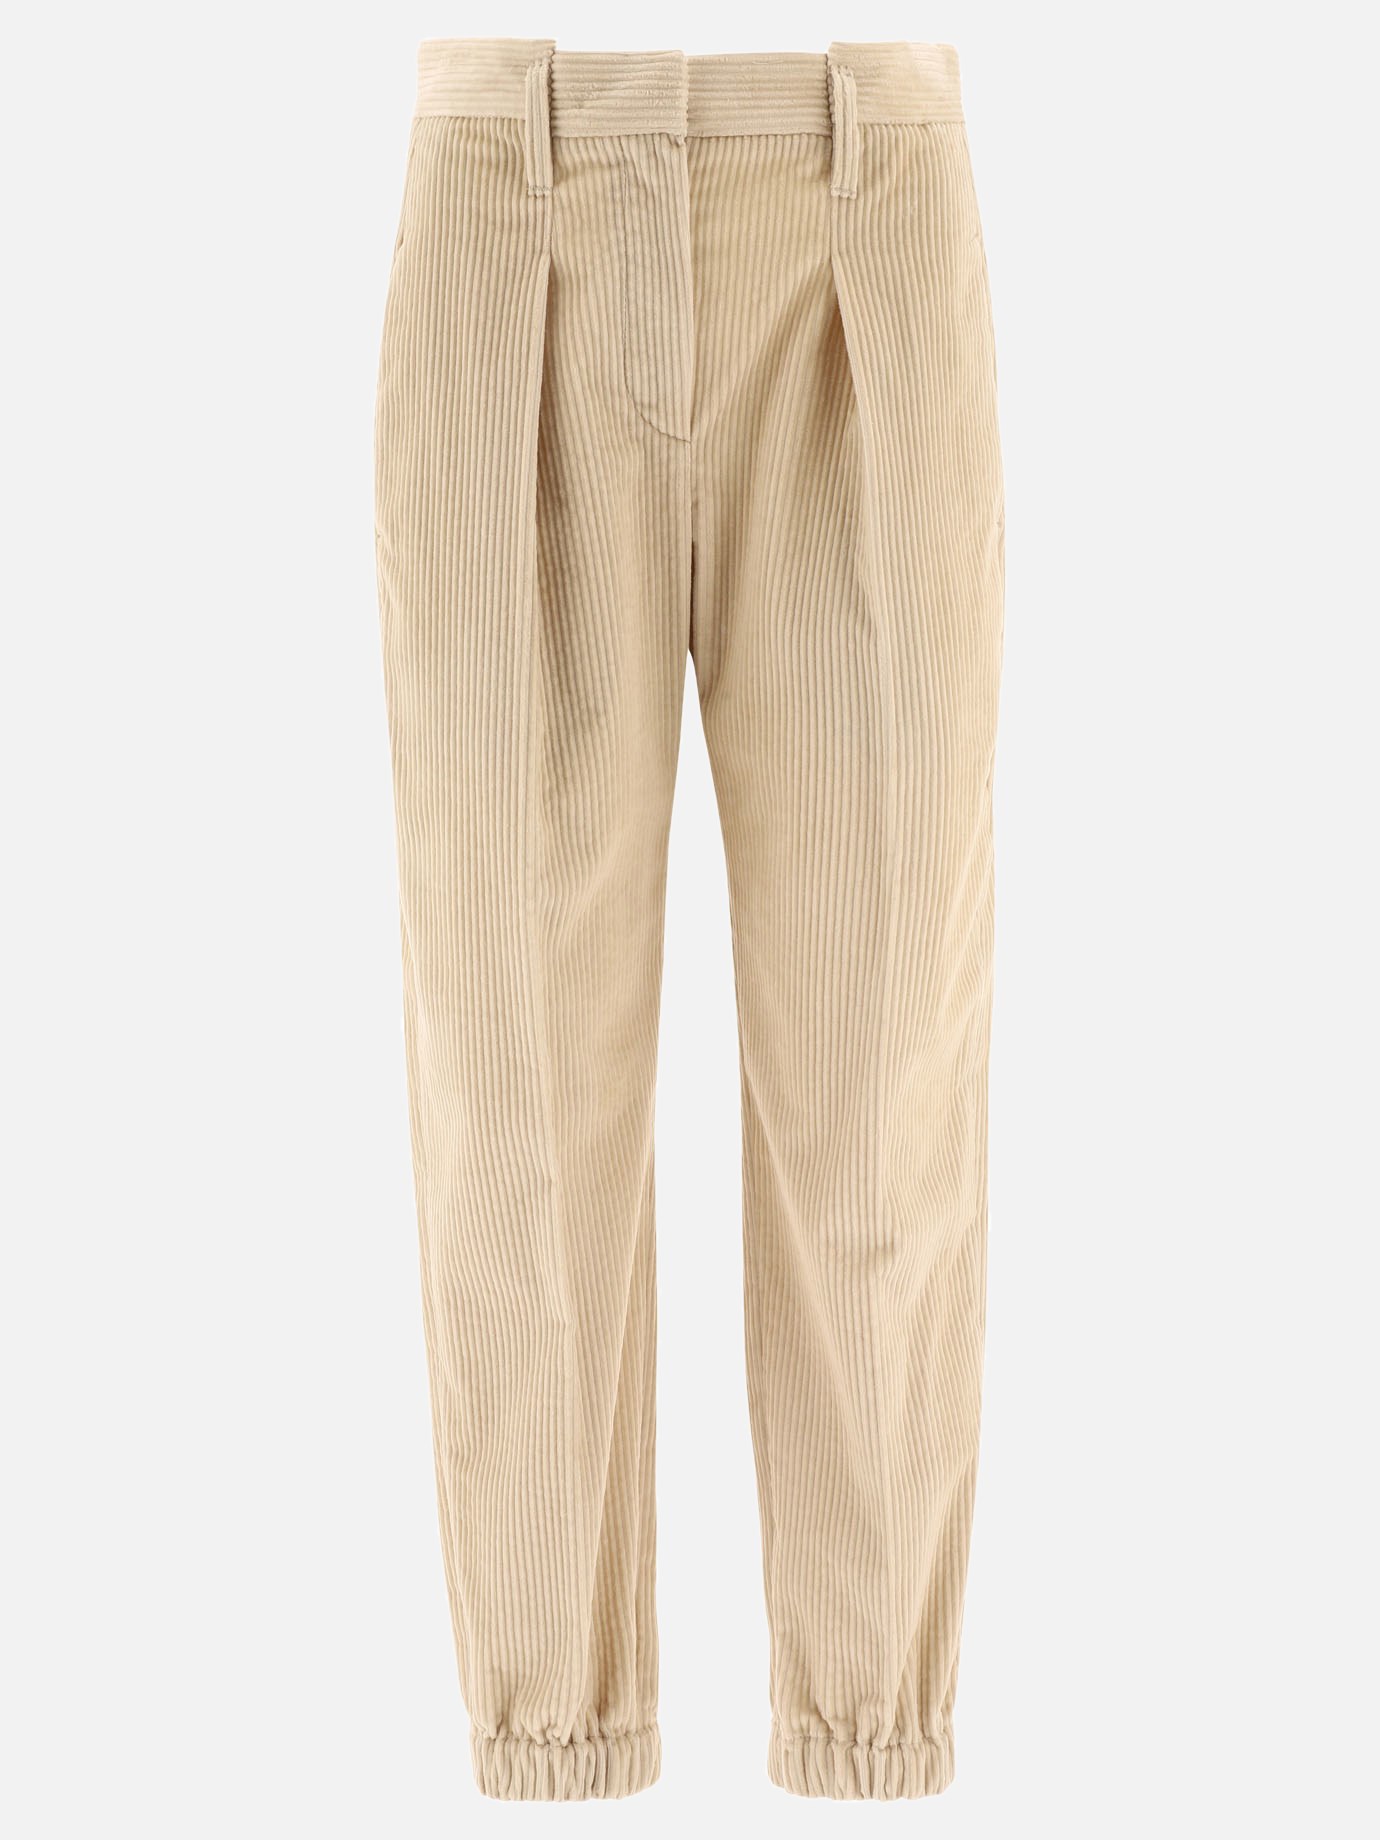 Ribbed stretch trousers